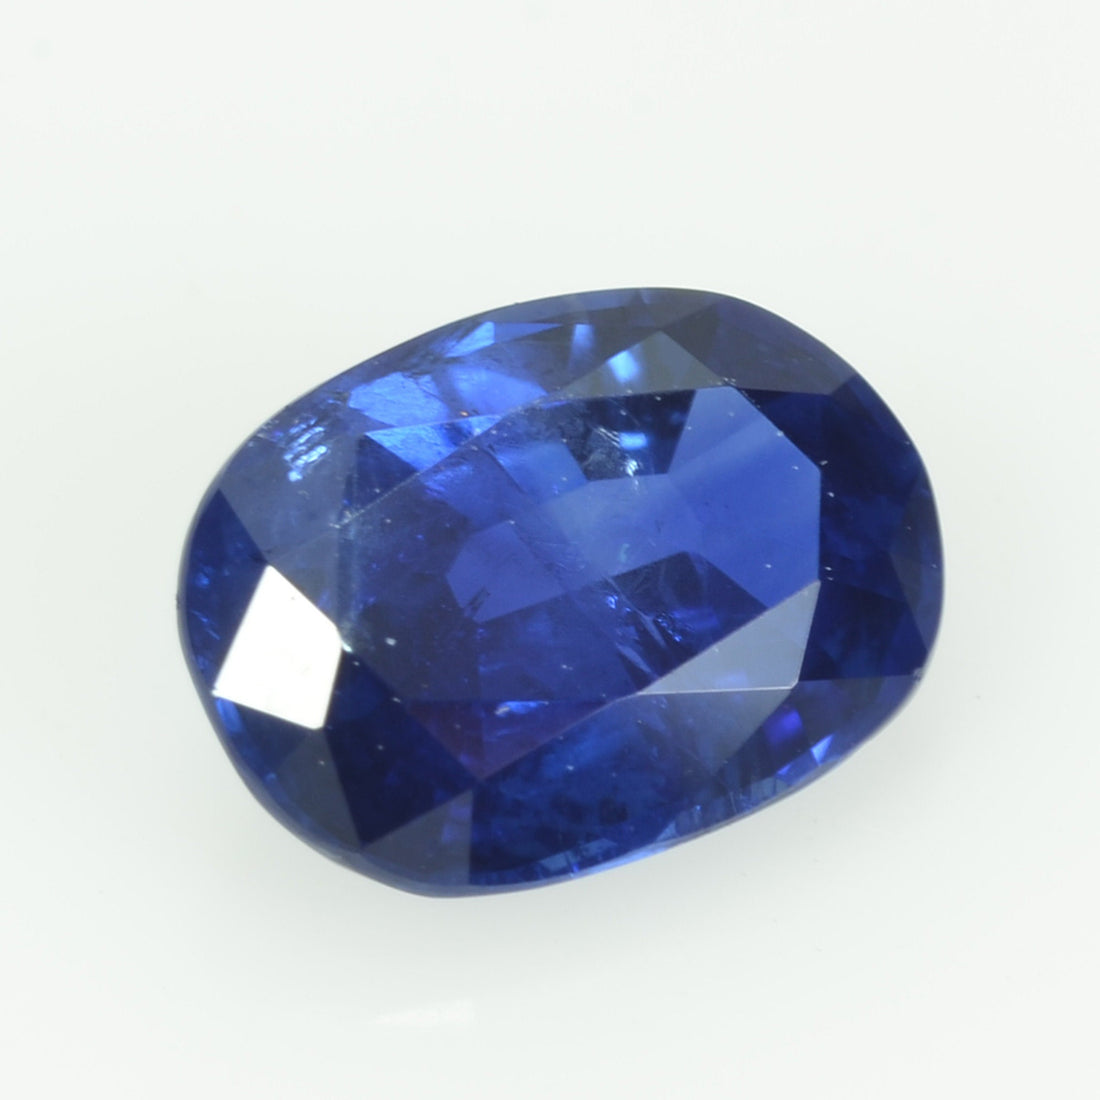 1.10 cts natural blue sapphire loose gemstone oval cut AGL Certified